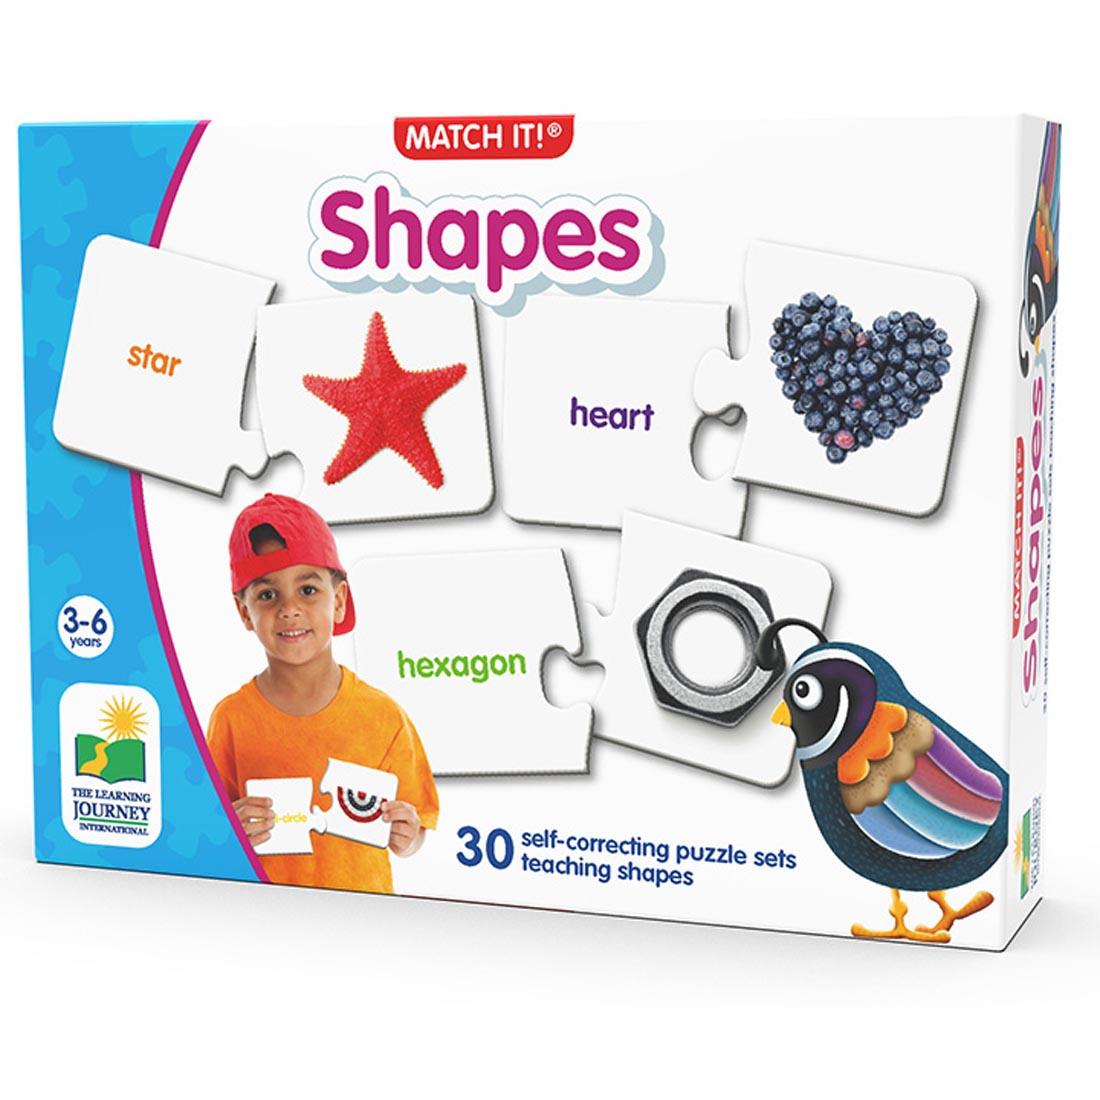 Match It! Shapes by The Learning Journey